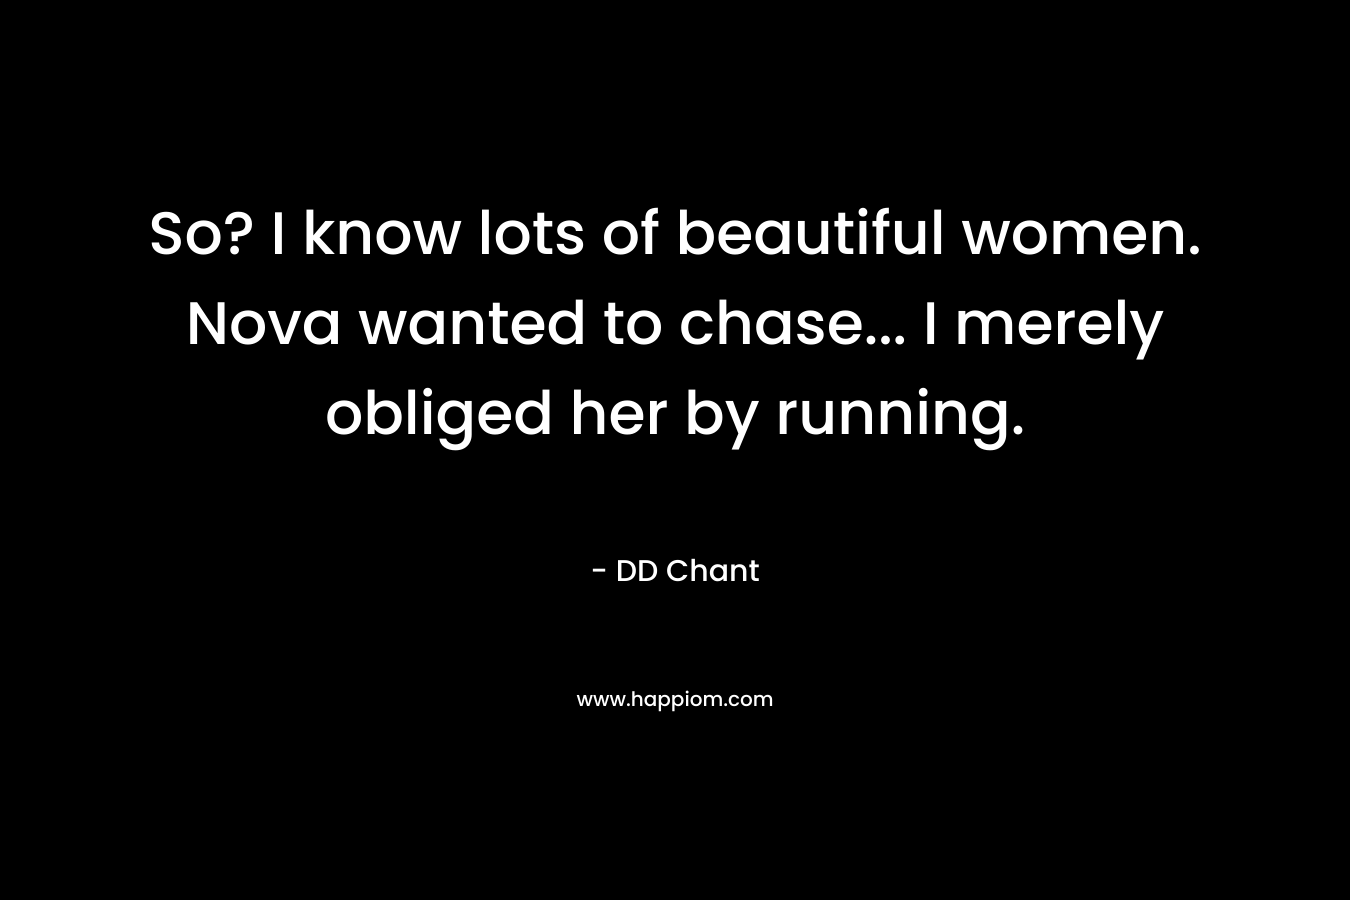 So? I know lots of beautiful women. Nova wanted to chase… I merely obliged her by running. – DD Chant